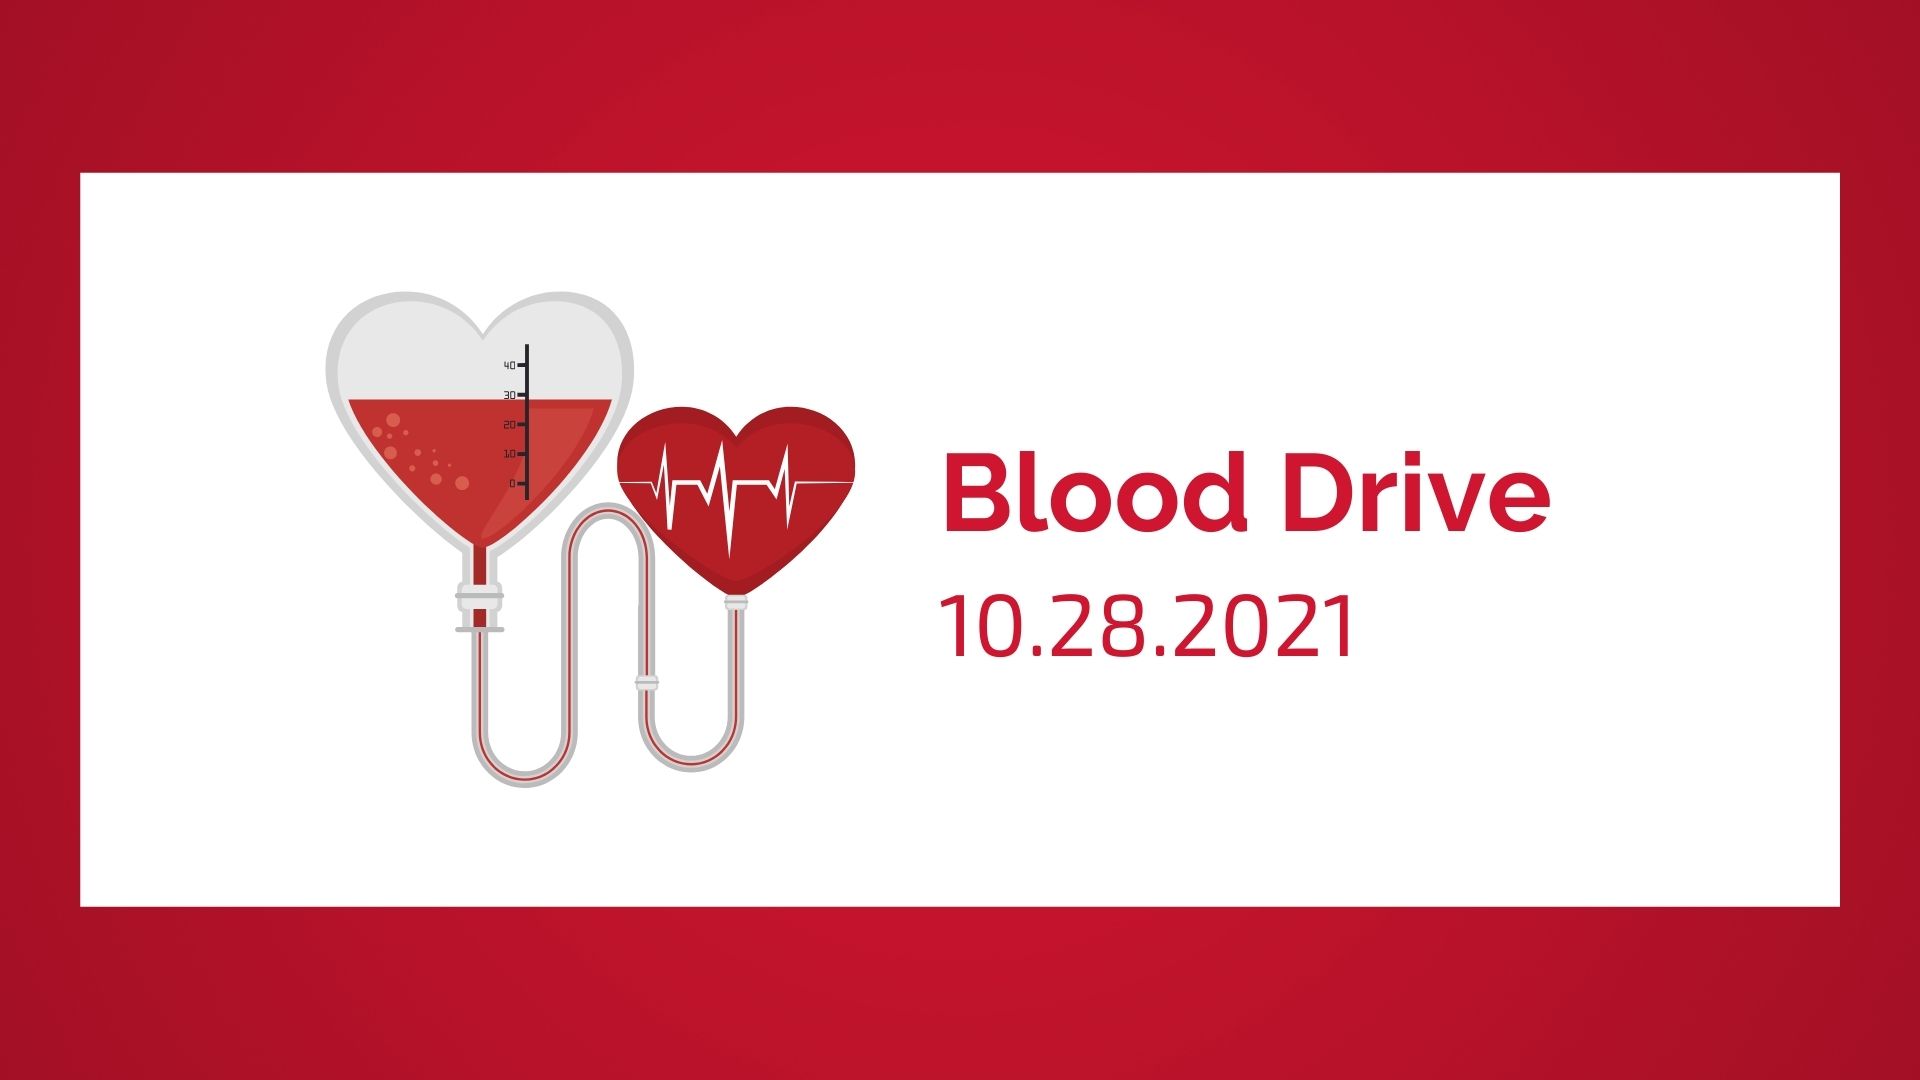 Trout CPA Hosts Blood Drive